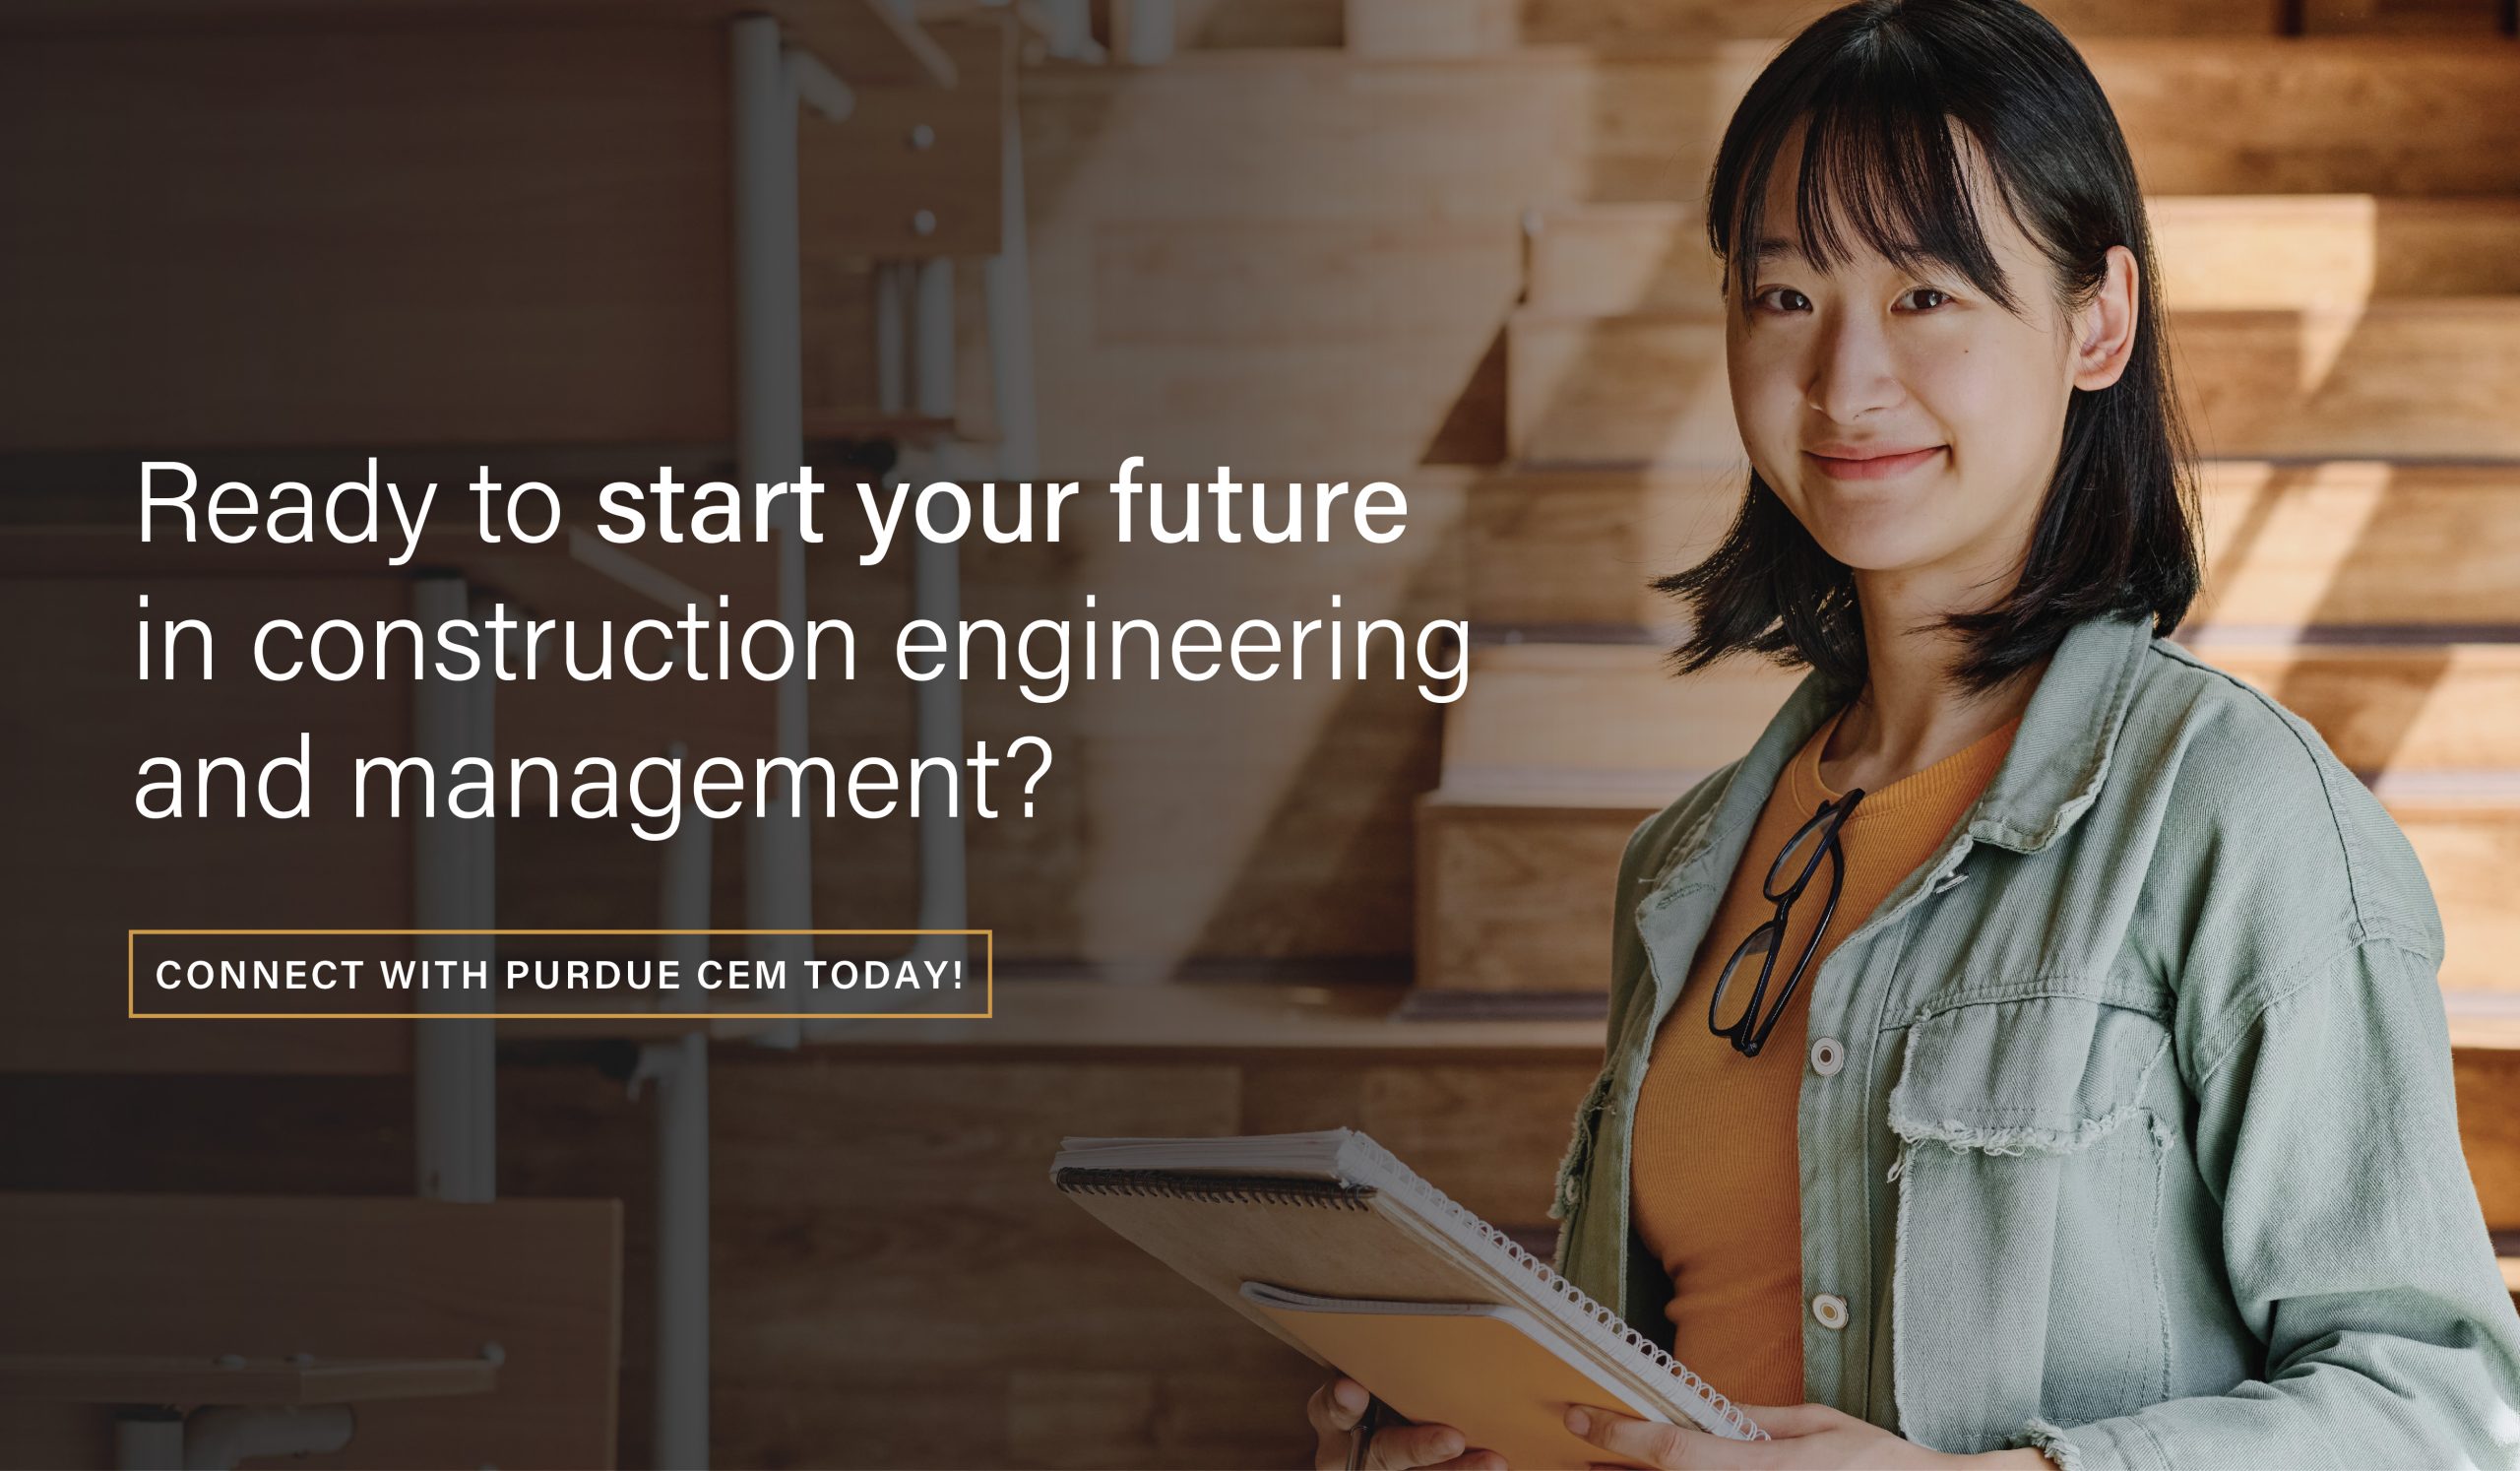 Ready to start your future in construction? Connect with Purdue CEM today!